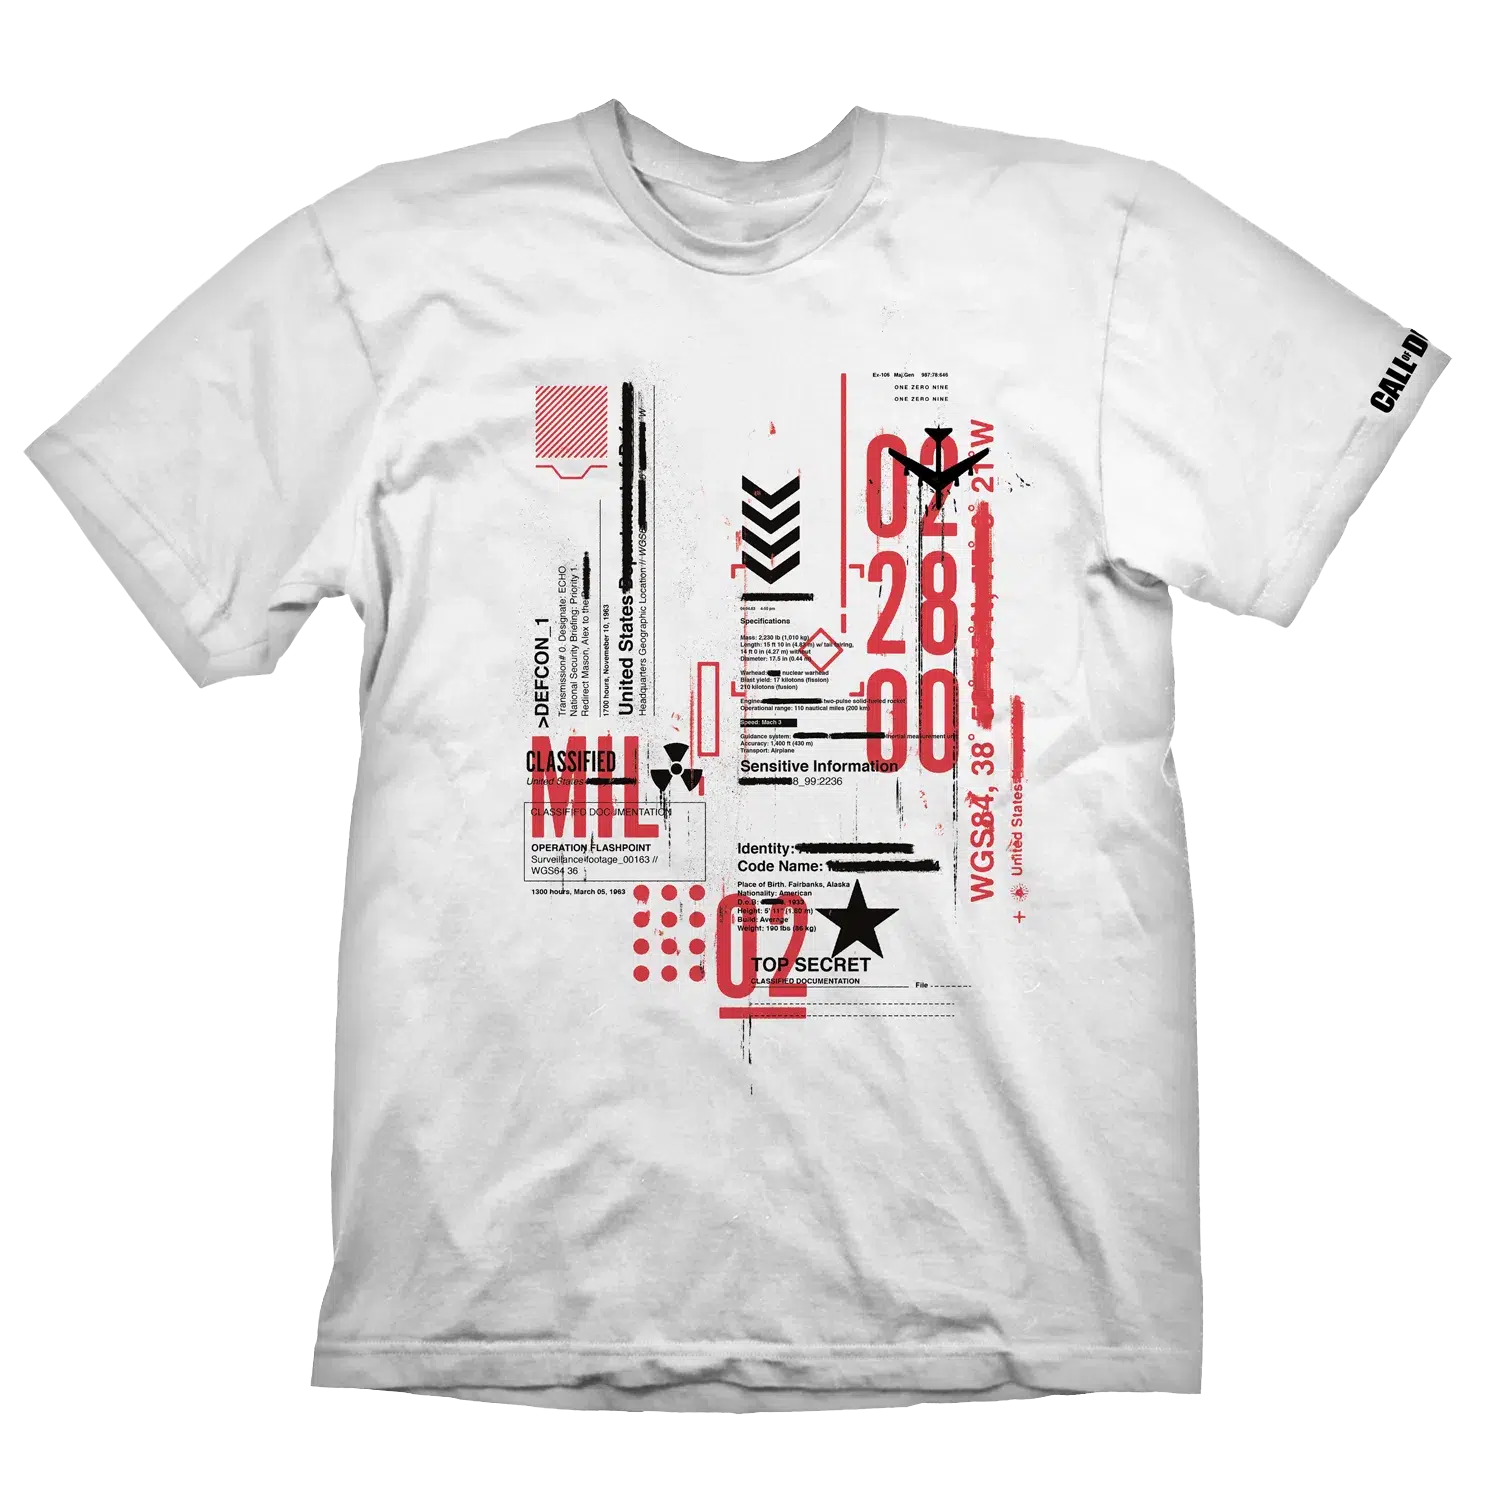 Call of Duty: T-Shirt "Defcon-1" White